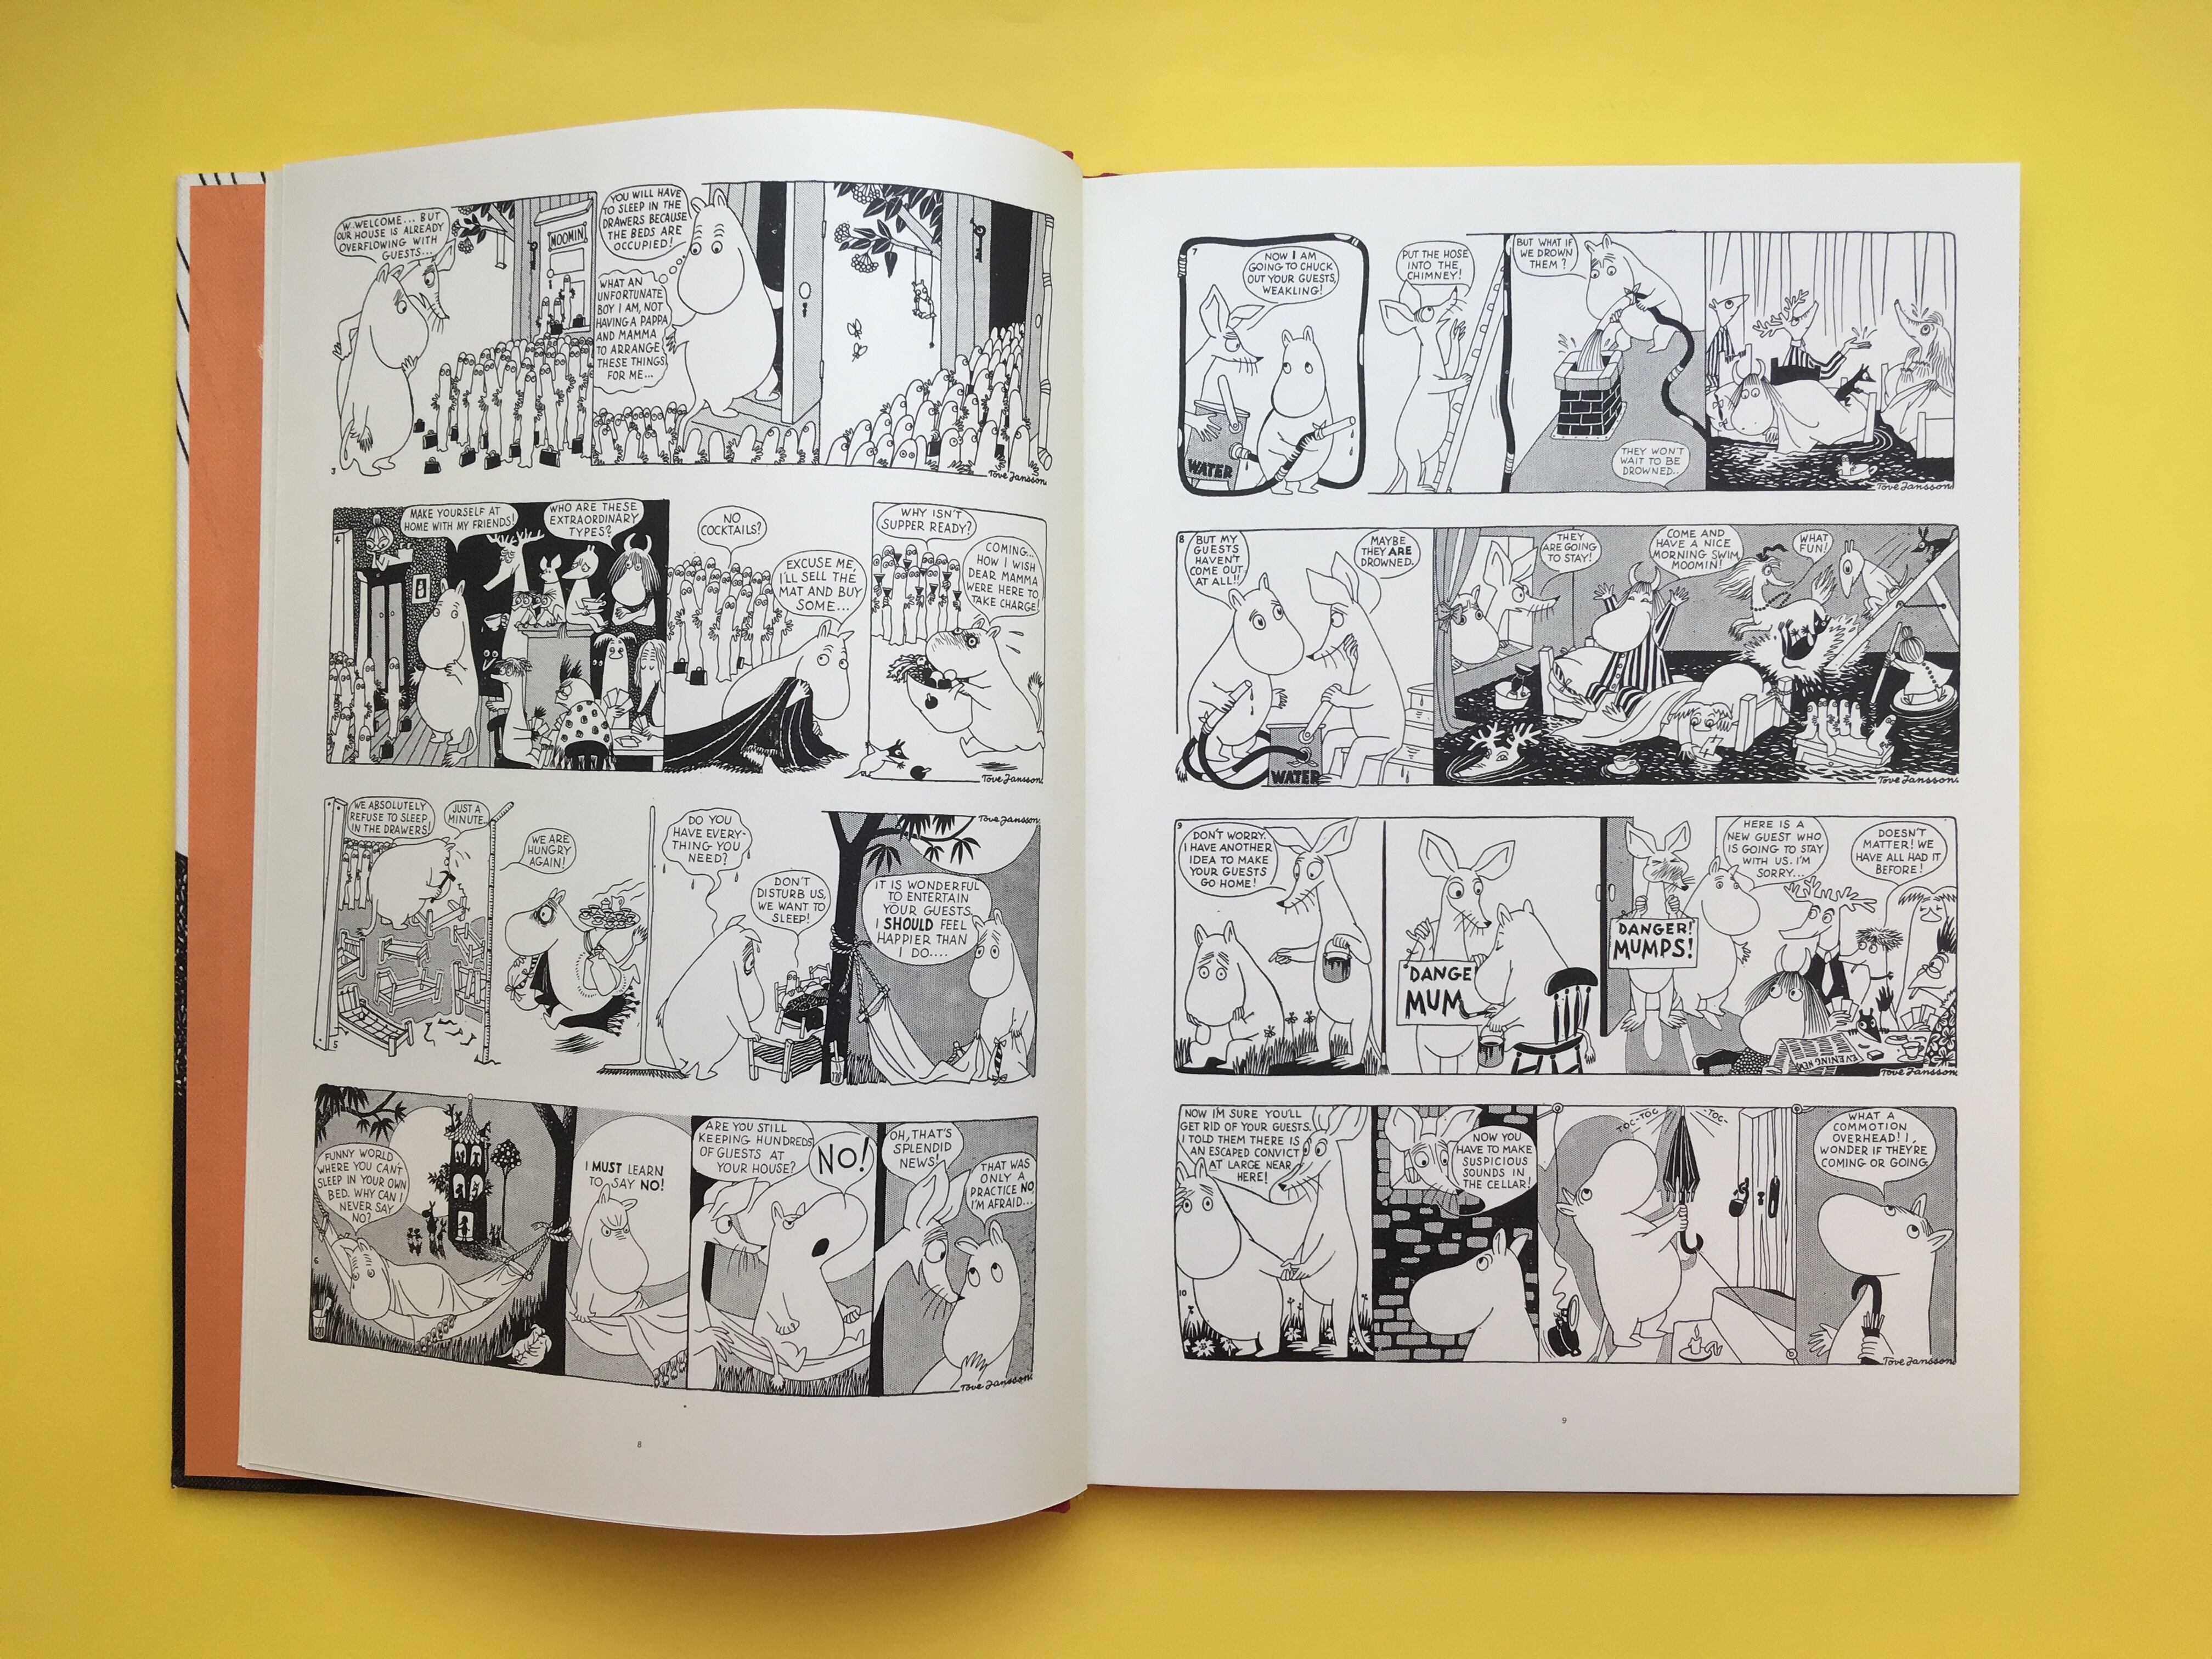 MOOMIN　コ本や　Book　(b213)　トーベ・ヤンソン　Comic　Jansson　Strip｜Tove　One　The　Jansson　Tove　Complete　shop　picture　book